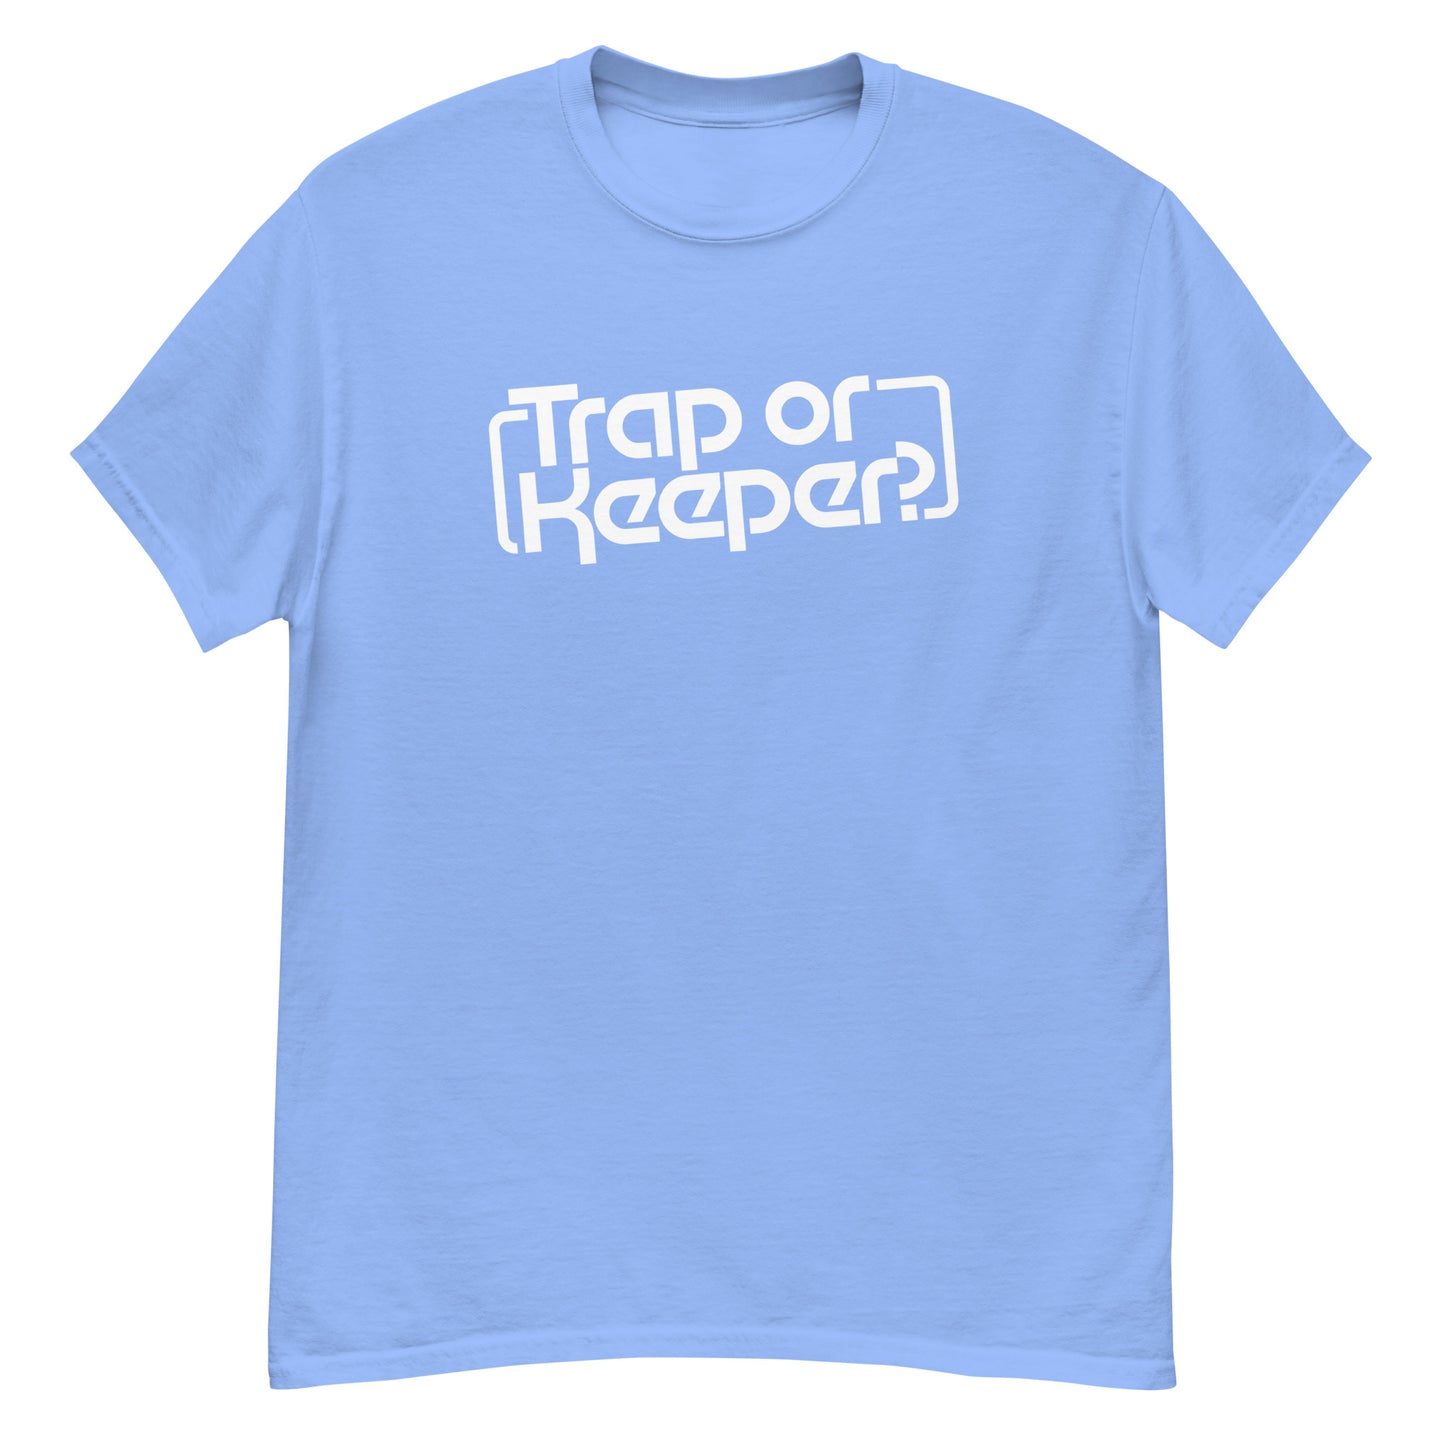 Trap or Keeper? t-shirt